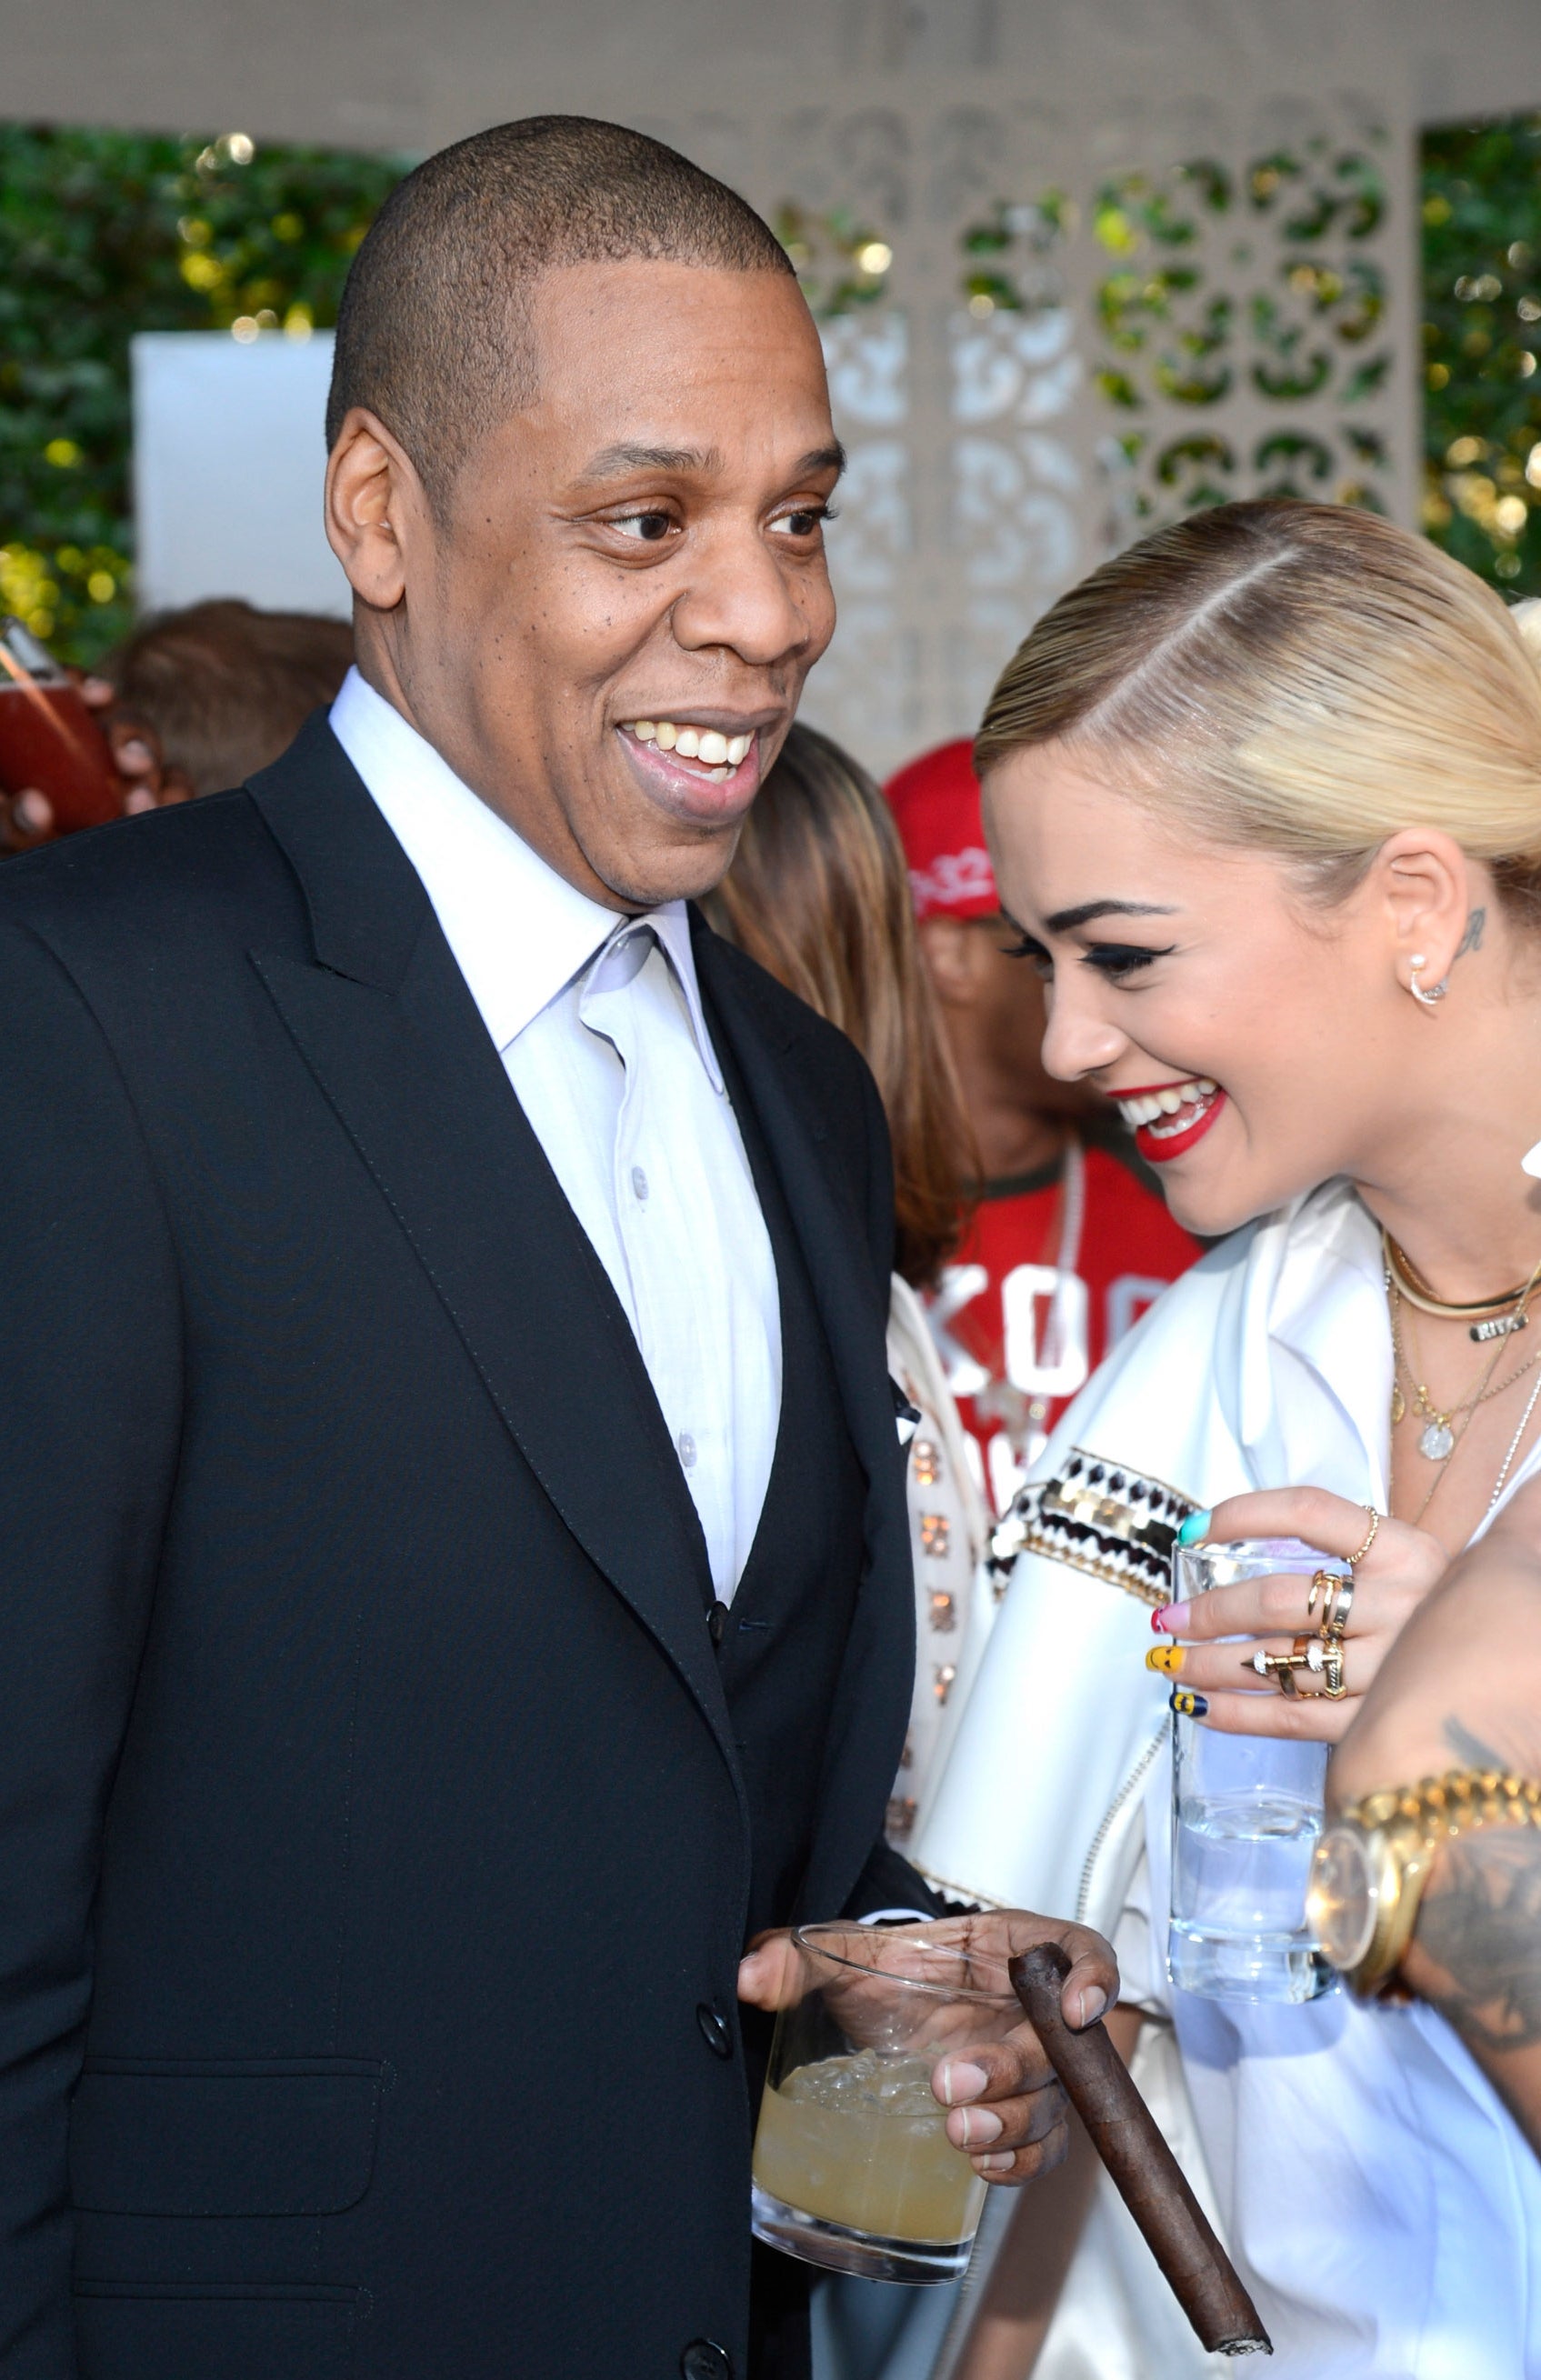 Jay-Z in a black suit seen conversing with Rita Ora in a patterned outfit, both smiling